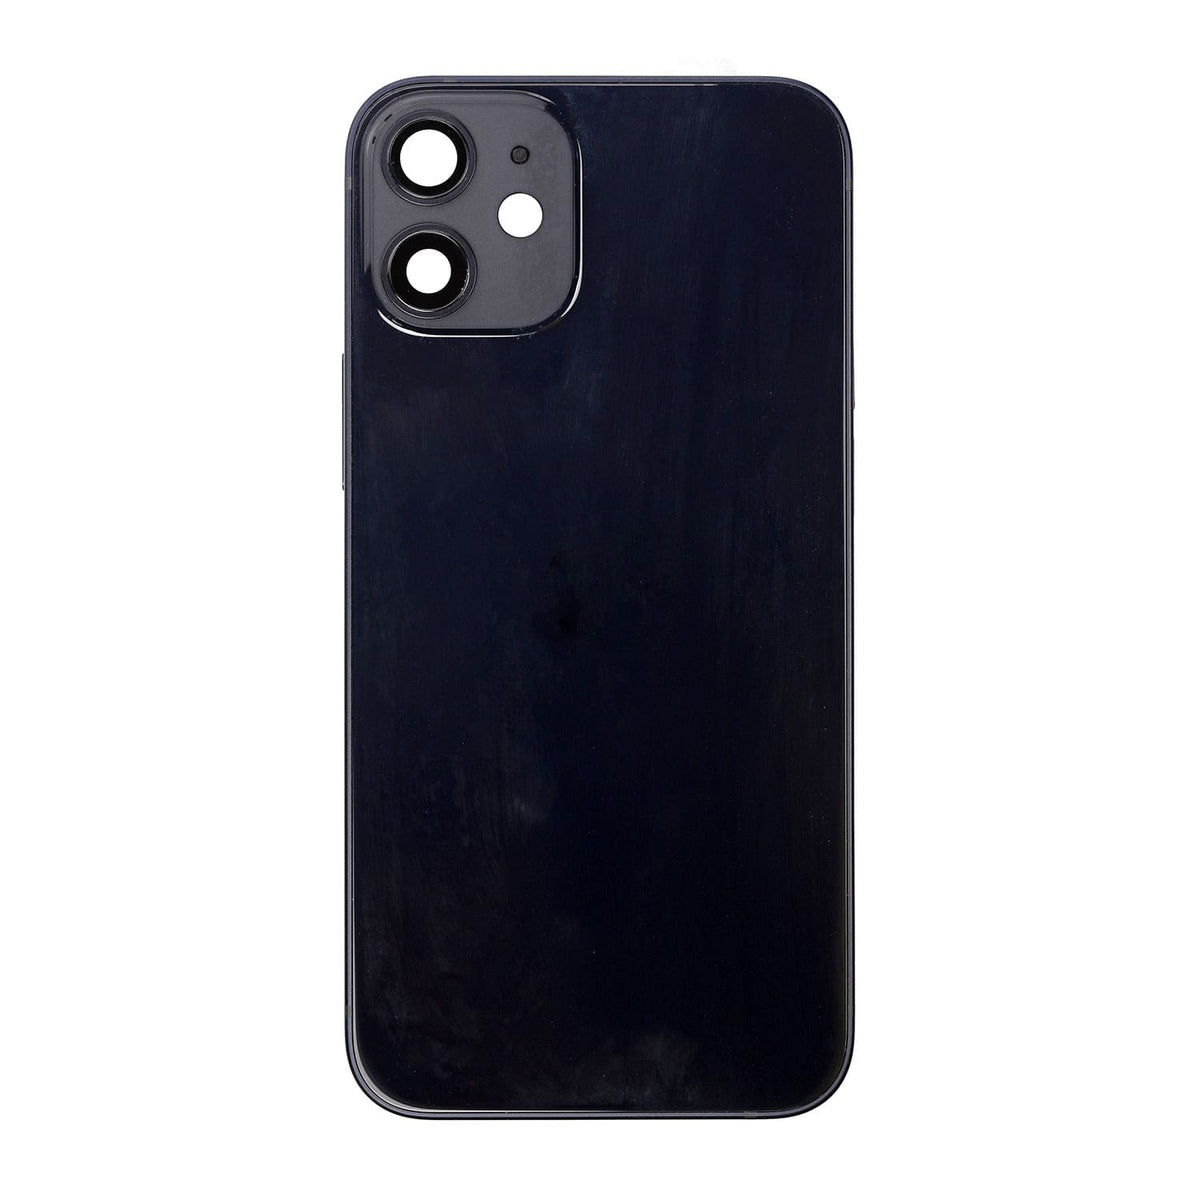 BLACK REAR HOUSING WITH FRAME FOR IPHONE 12 MINI